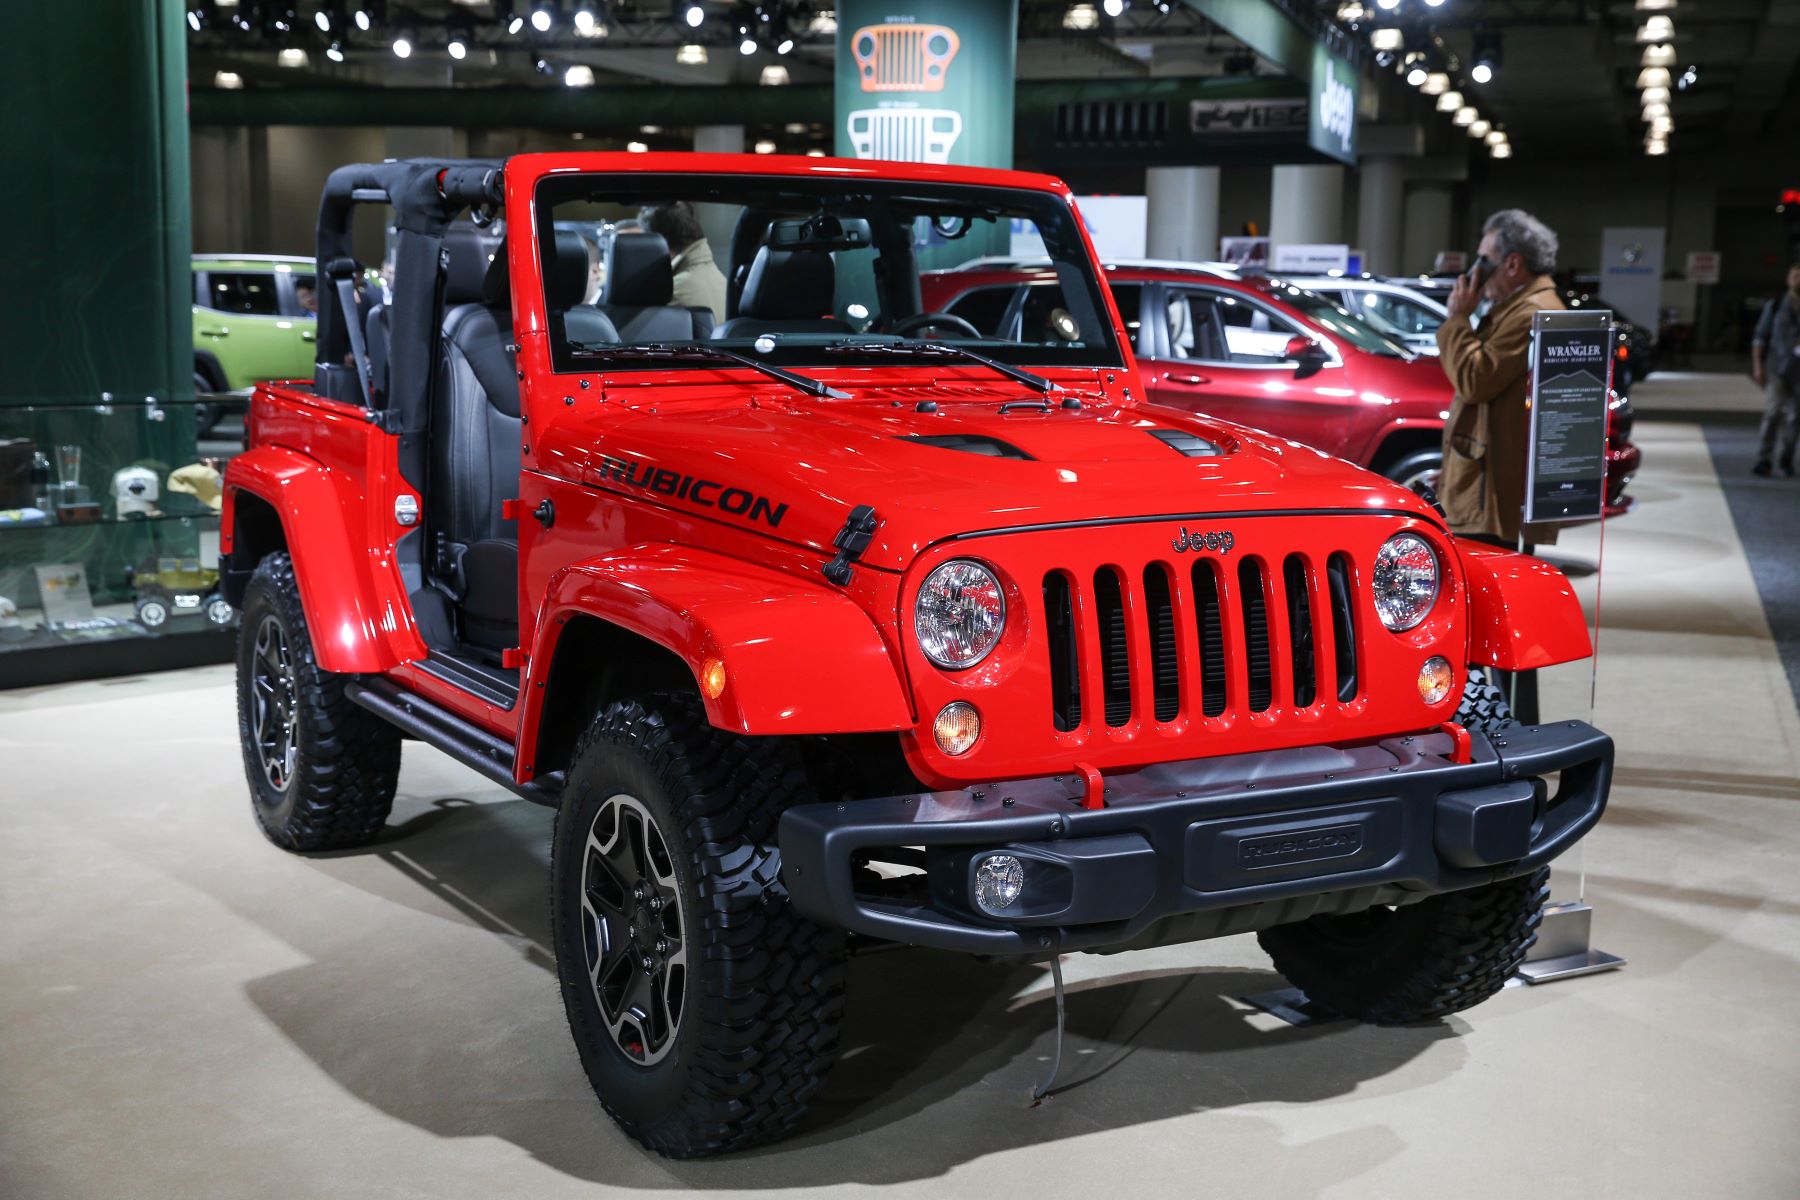 The Jeep Wrangler Rubicon off-road SUV seen at the 2016 New York International Auto Show at the Javits Convention Center